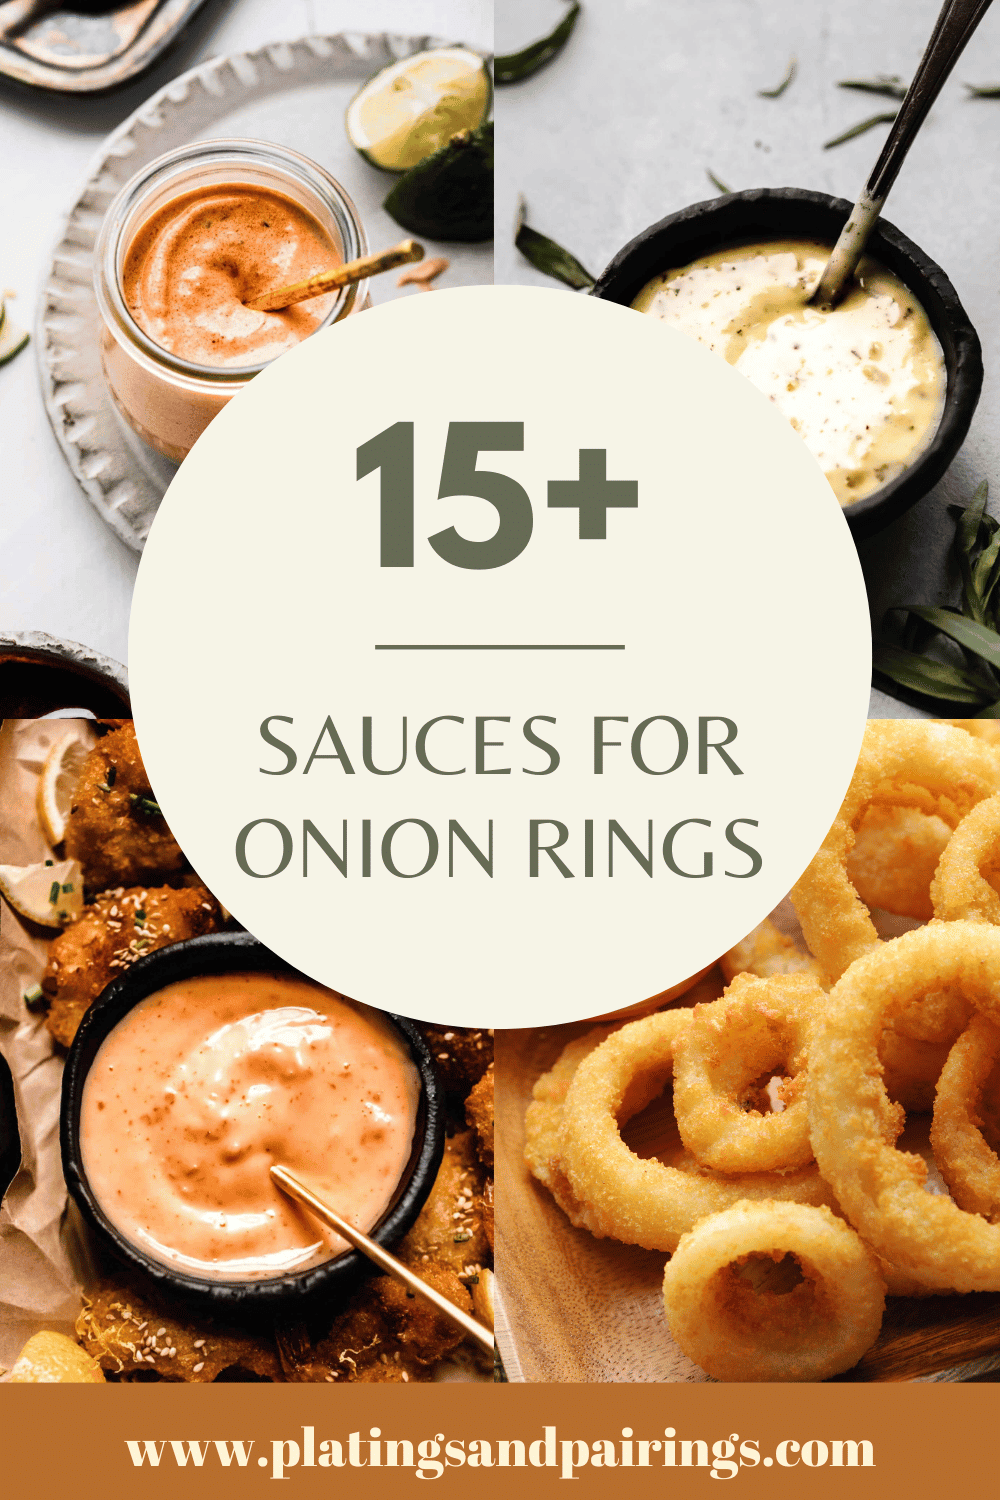 Collage of dipping sauces for onion rings with text overlay.